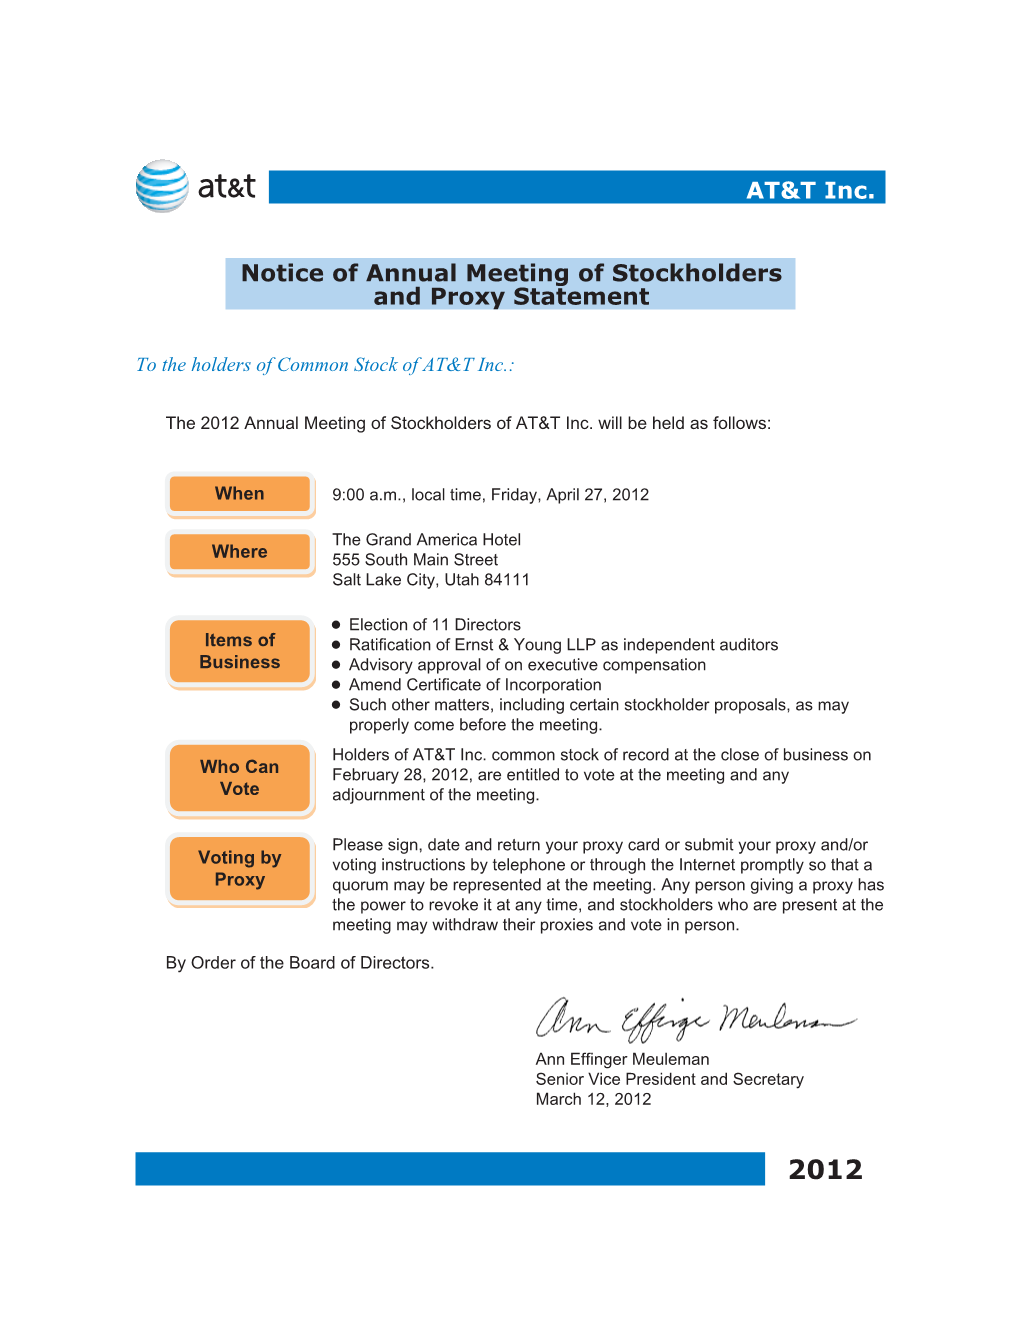 AT&T Inc. Notice of Annual Meeting of Stockholders and Proxy Statement